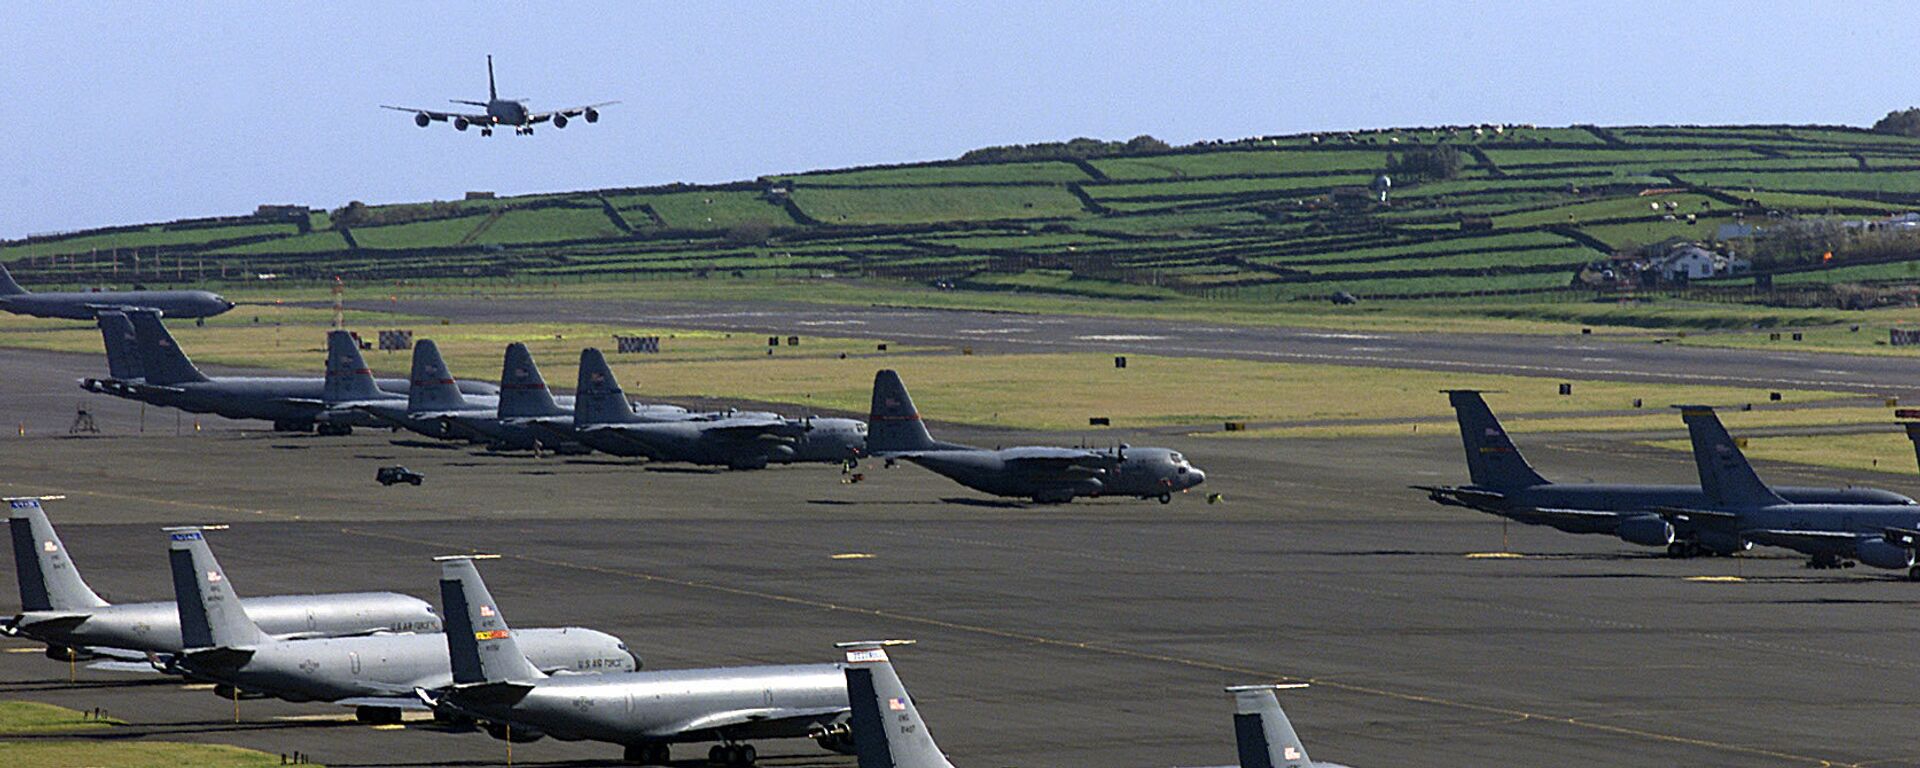 An undated file picture taken in March 2003 shows a US Air Force plane landing on the Base das Lajes, a US military base in the Portuguese archipelago of Azores. - Sputnik International, 1920, 22.02.2018